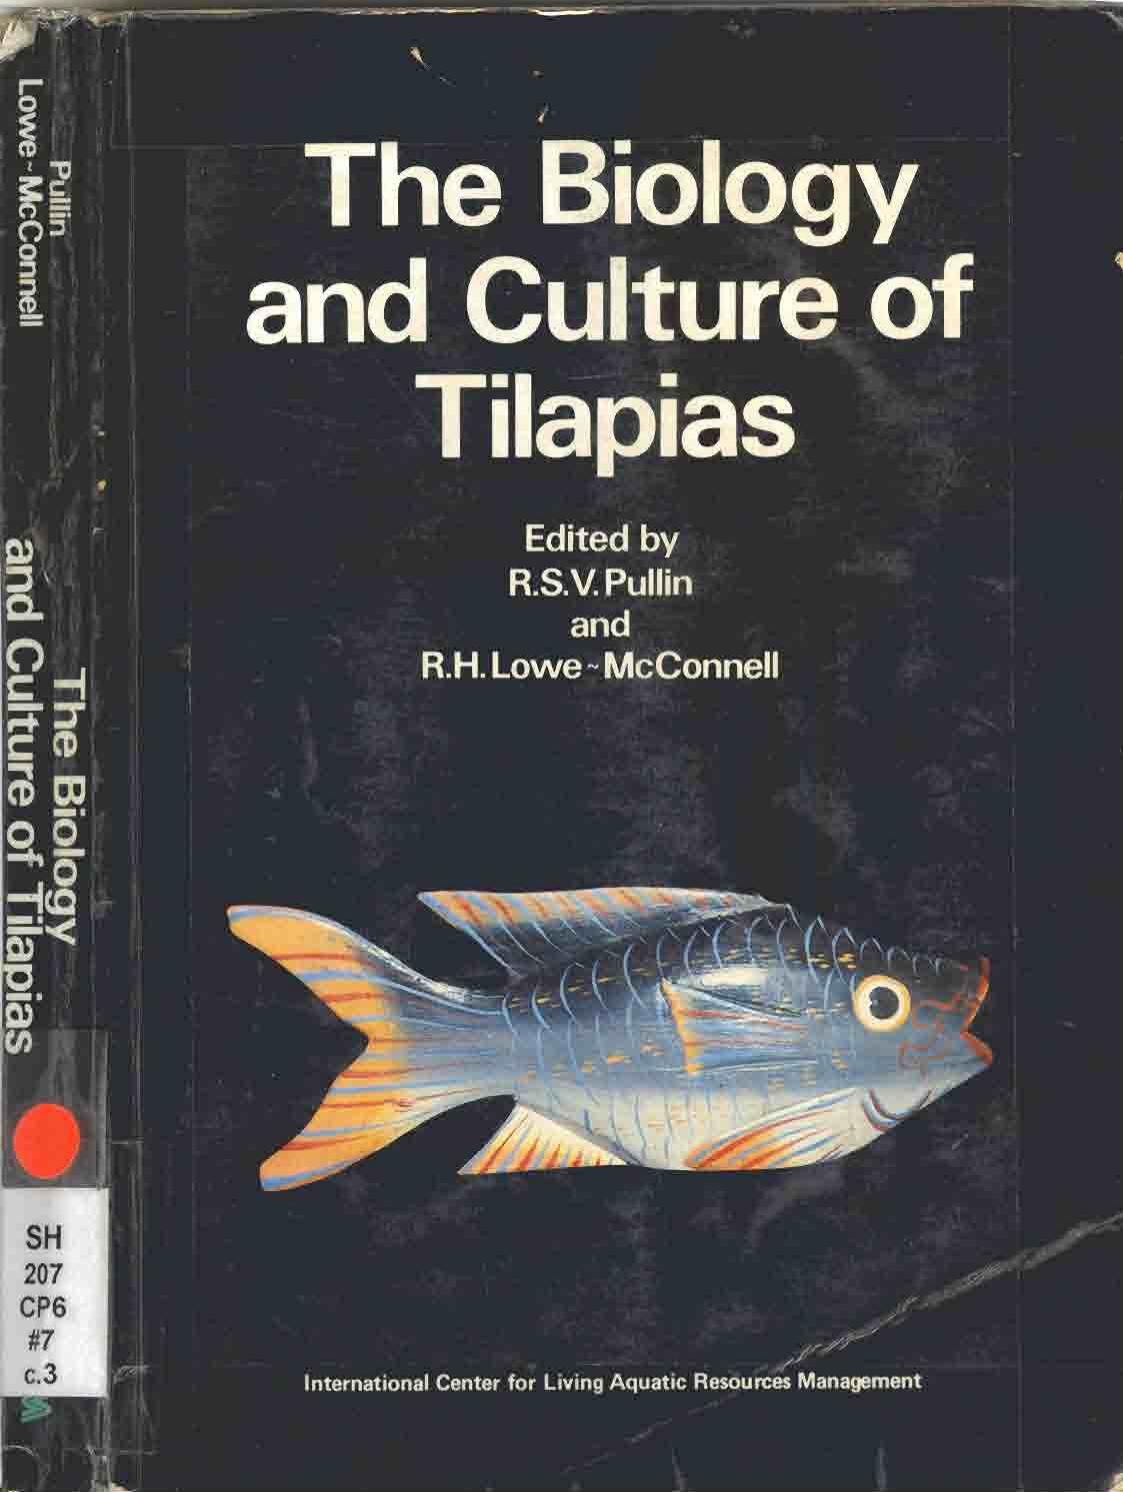 The Biology and Culture of Tilapias 1982